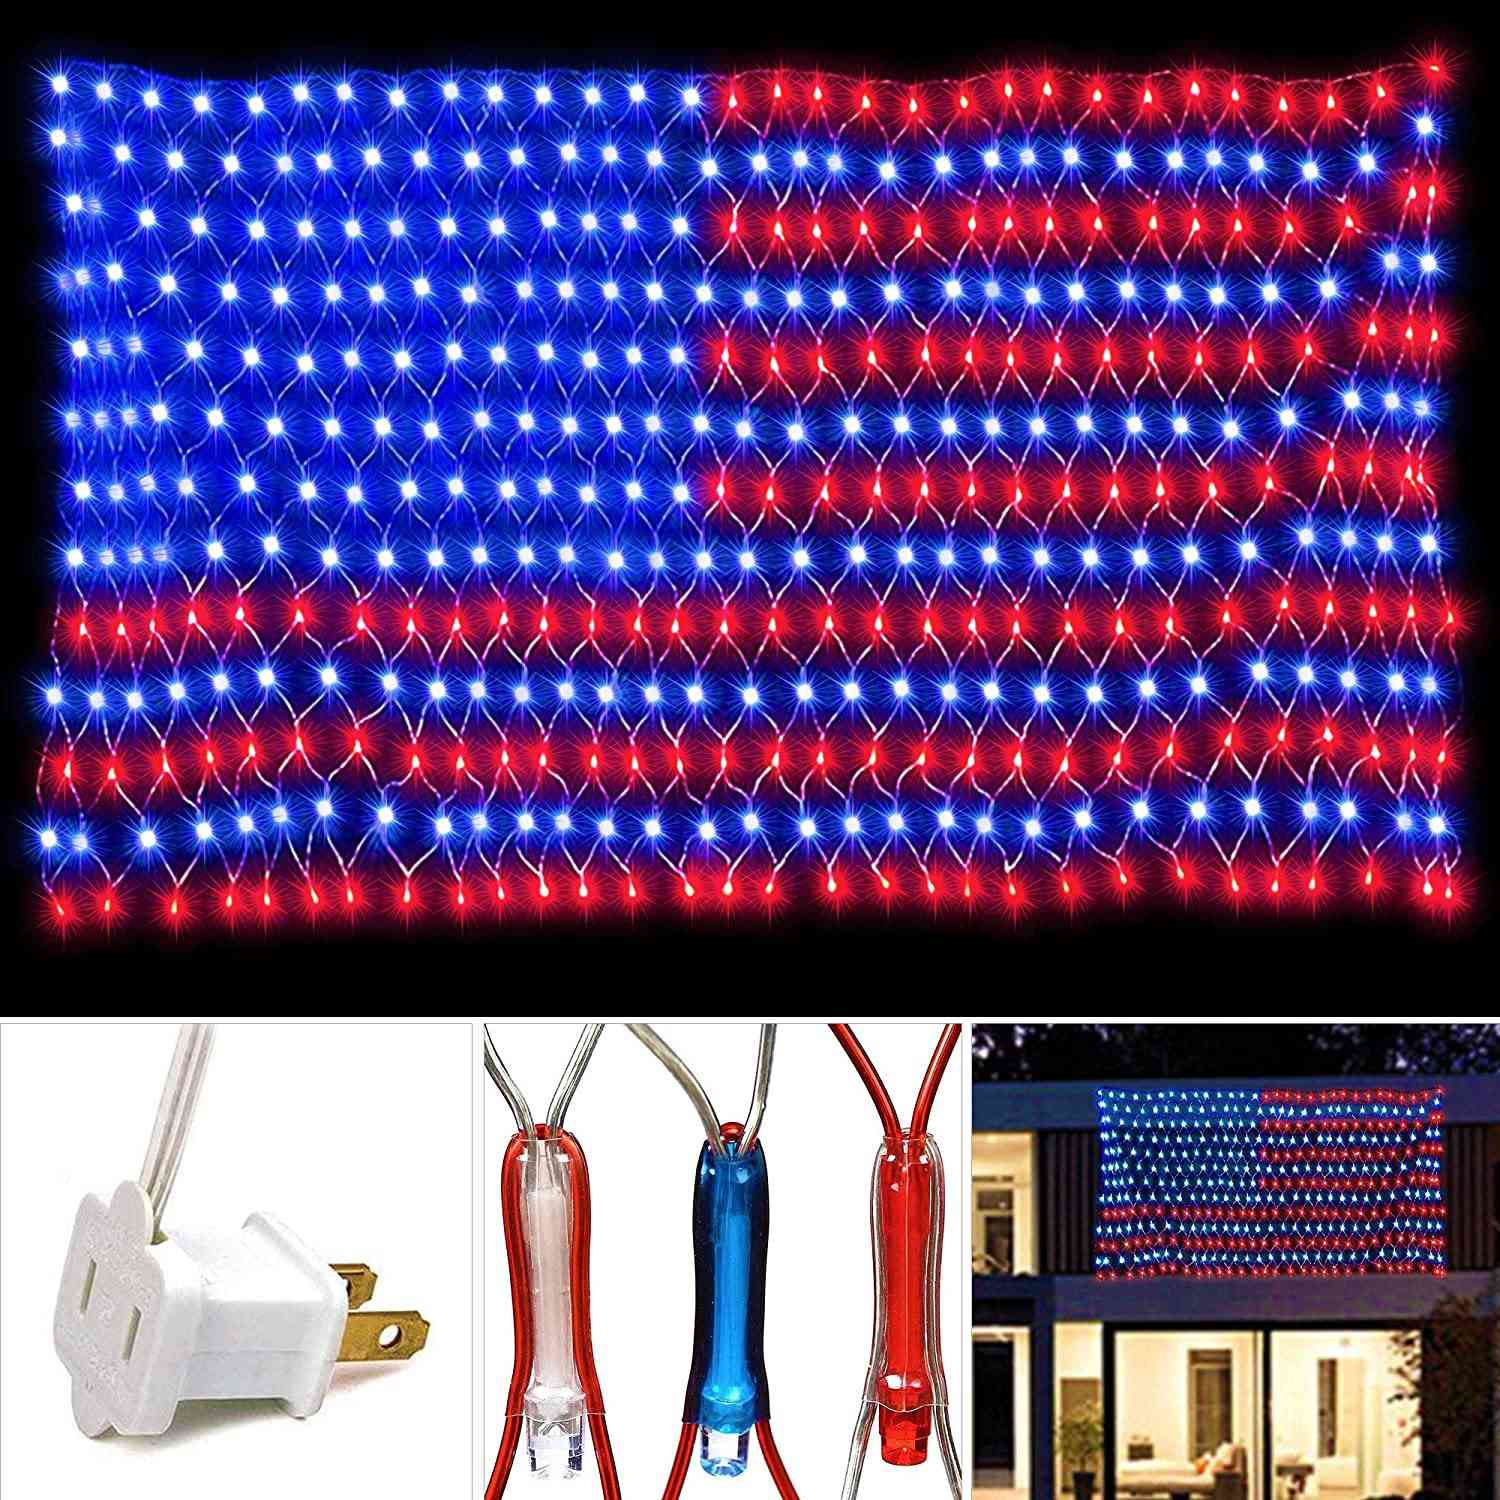 Waterproof Us Flag String Lights With 420 Bright Leds